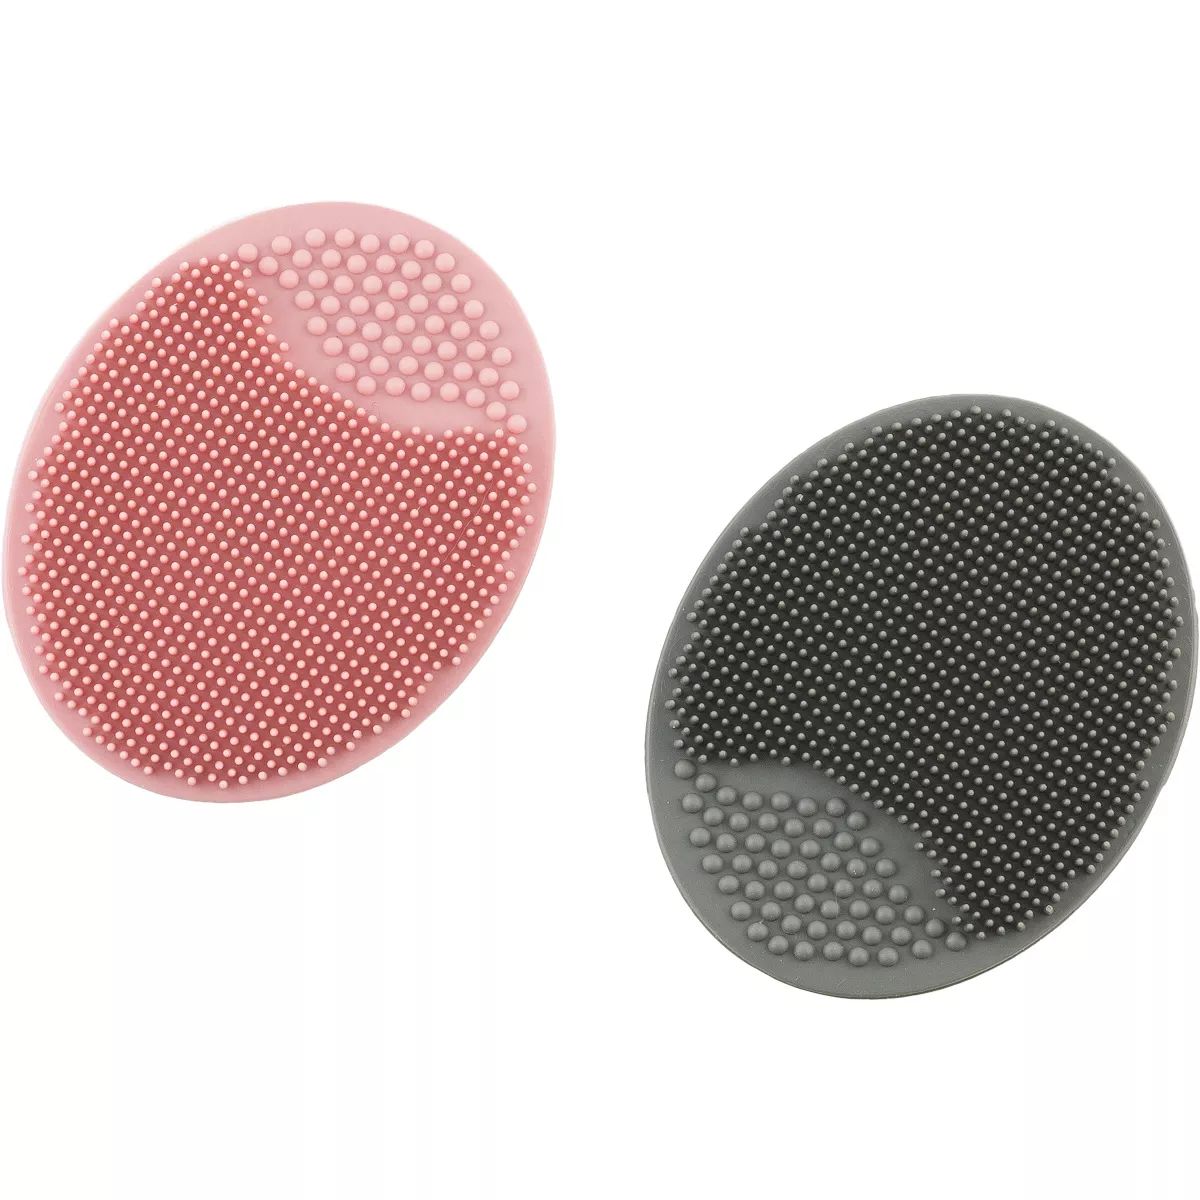 JAPONESQUE Facial Cleansing Silicone Scrubber Tool | Target